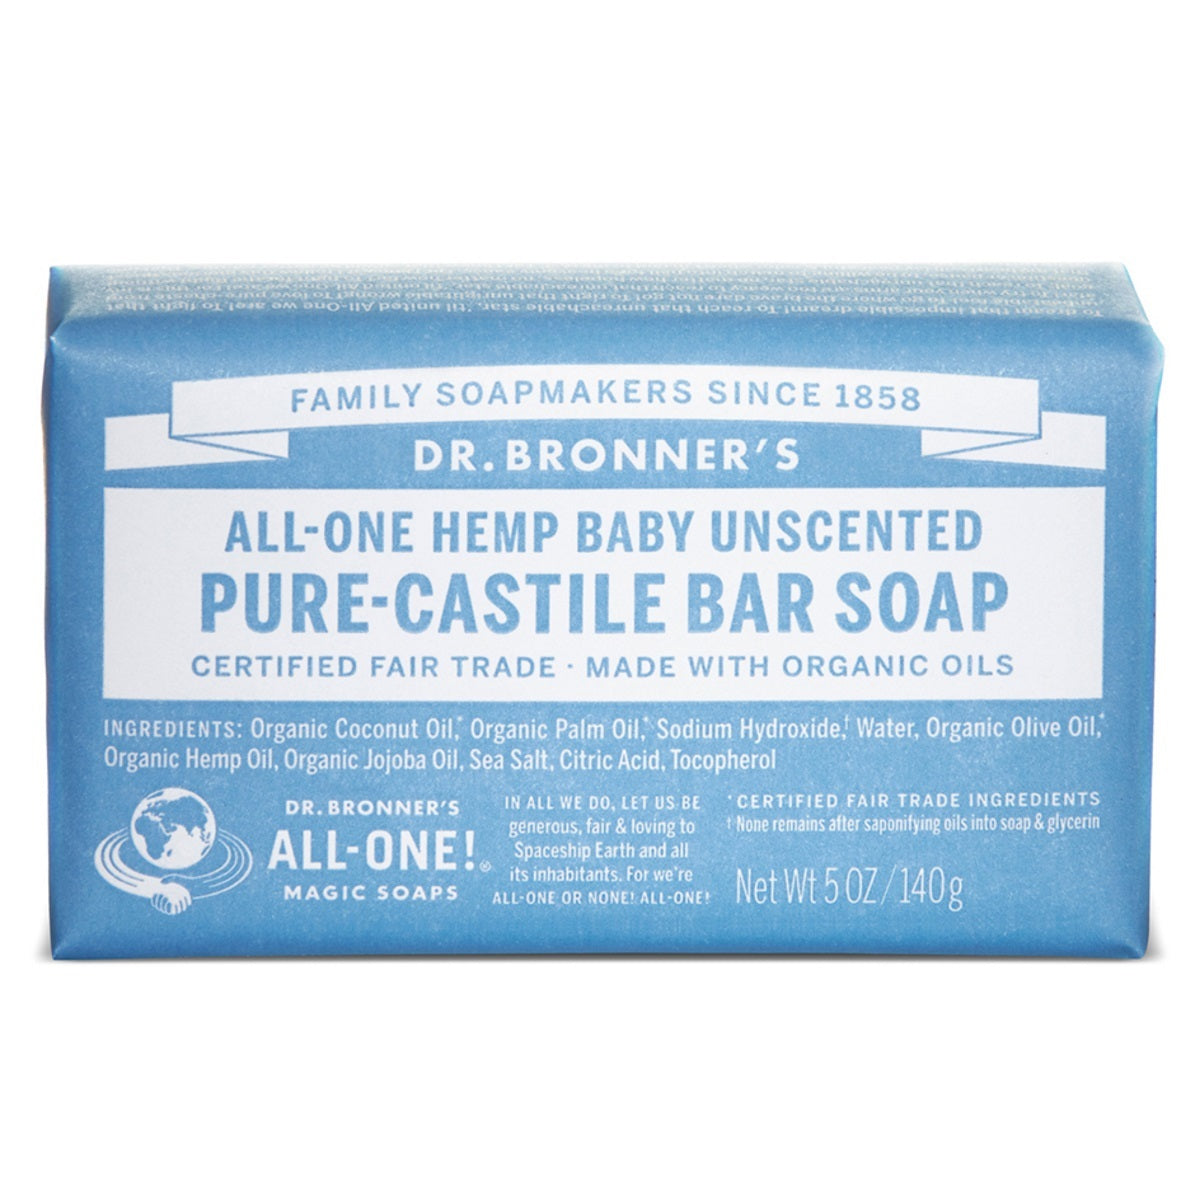 Dr. Bronner's All-One Hemp Baby Unscented Pure-Castile Bar Soap, 5